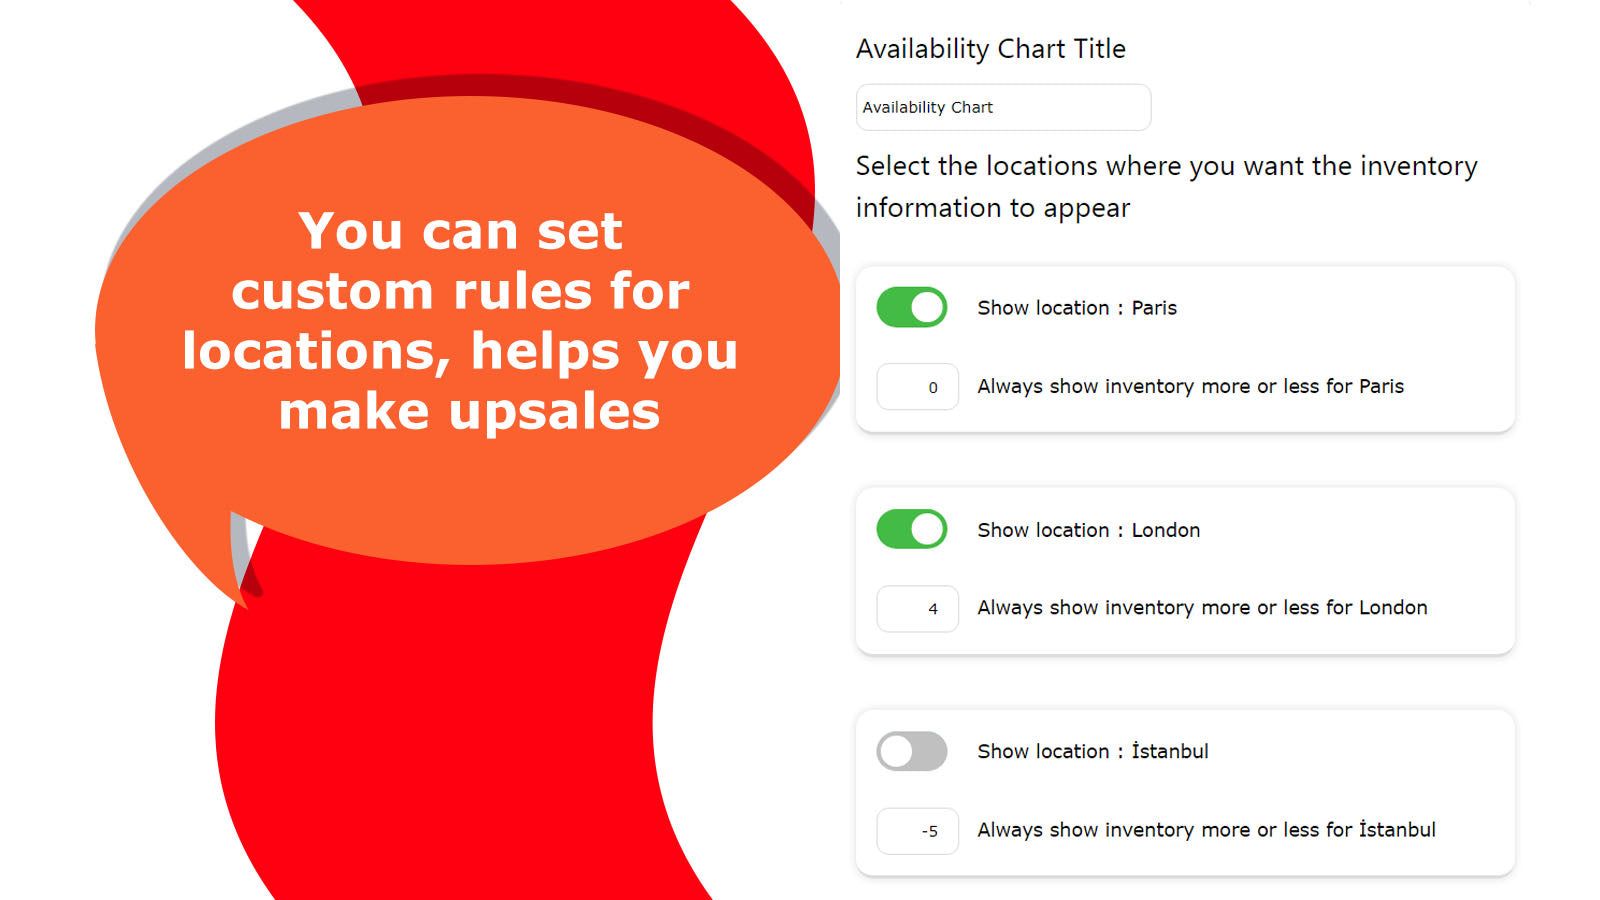 You can set custom rules for locations.